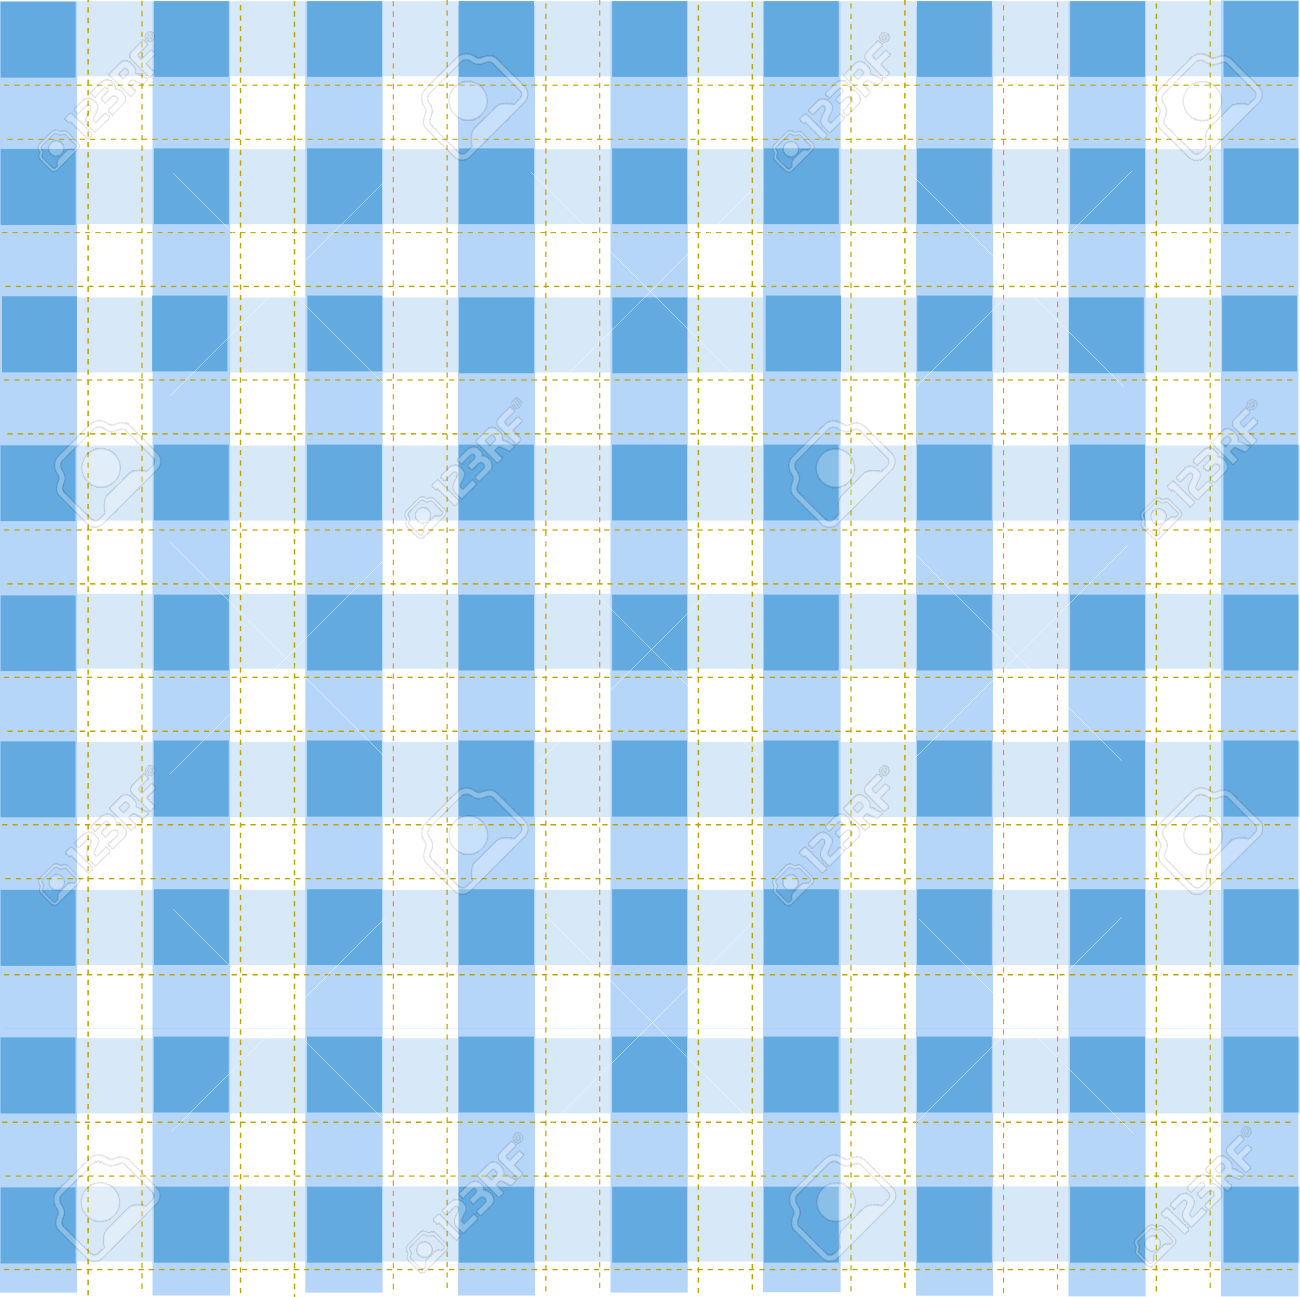 Free Plaid Pattern Cliparts, Download Free Clip Art, Free.